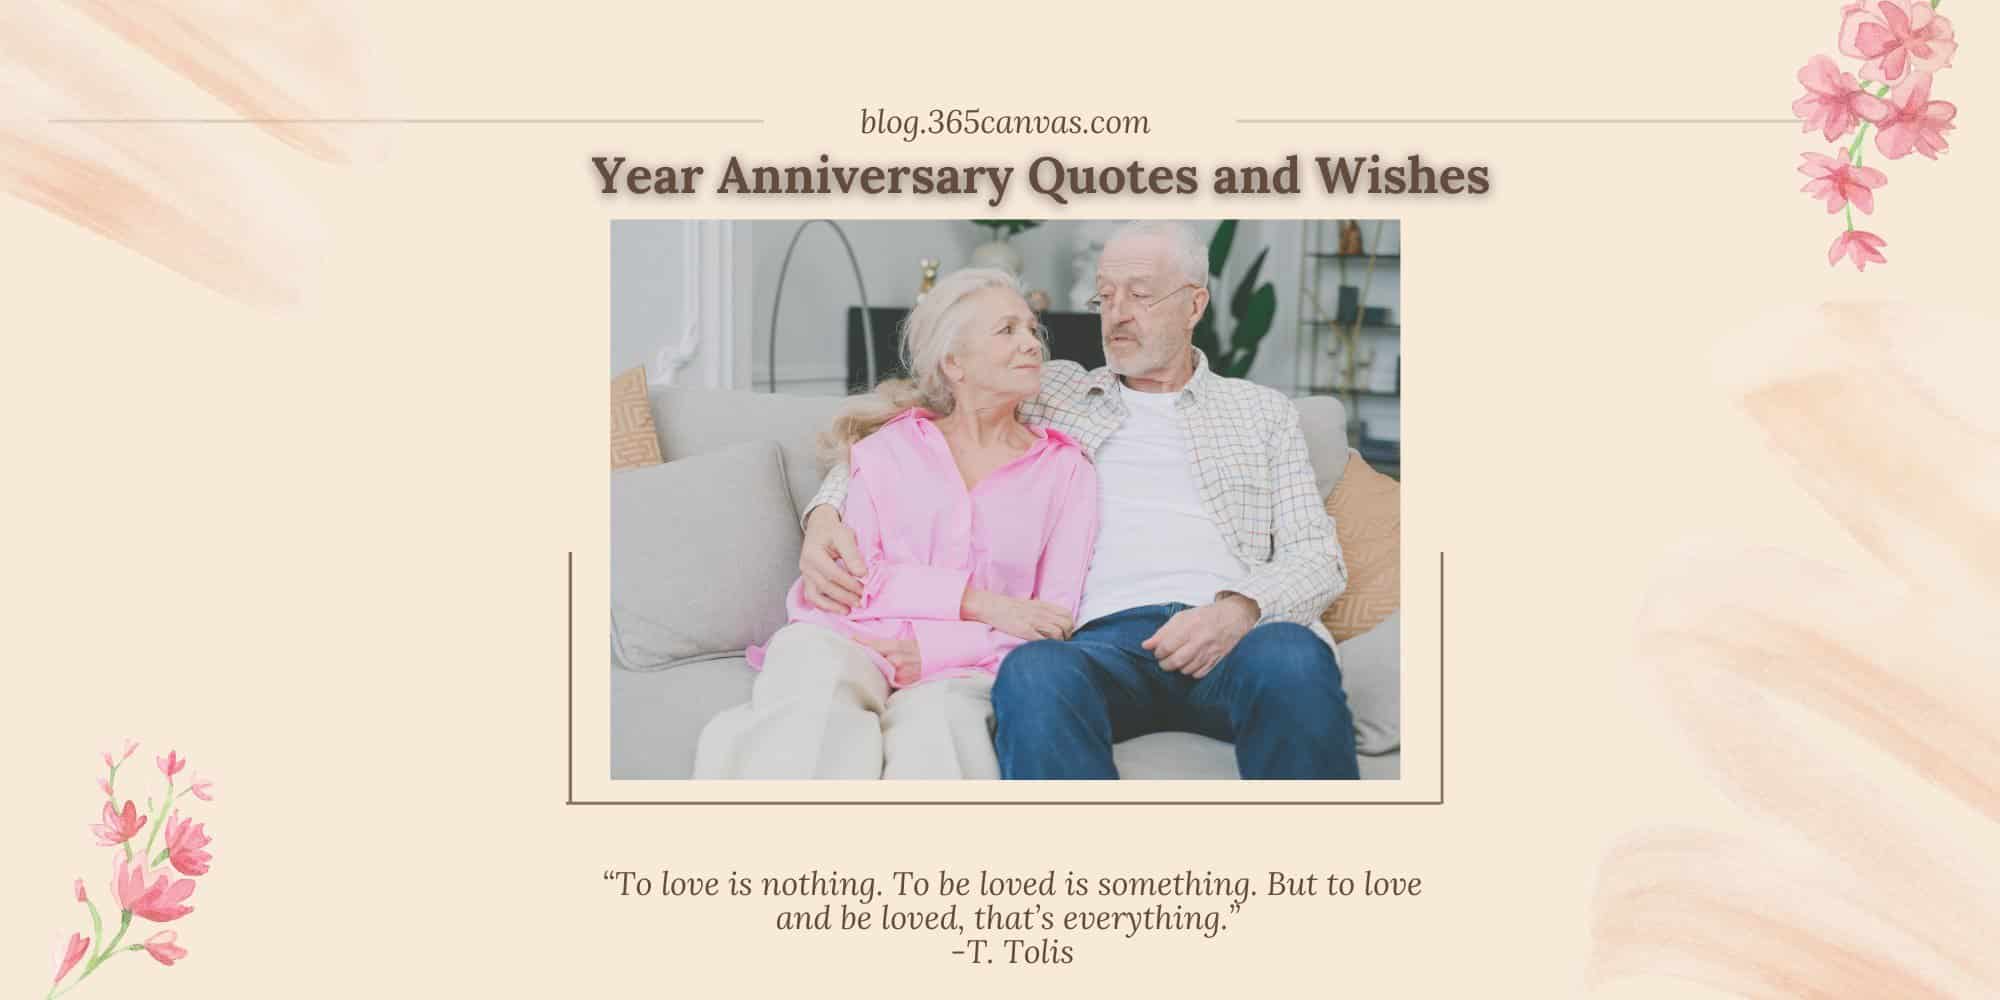 50+ 51st Year Photo Anniversary Quotes, Wishes, Messages with Image